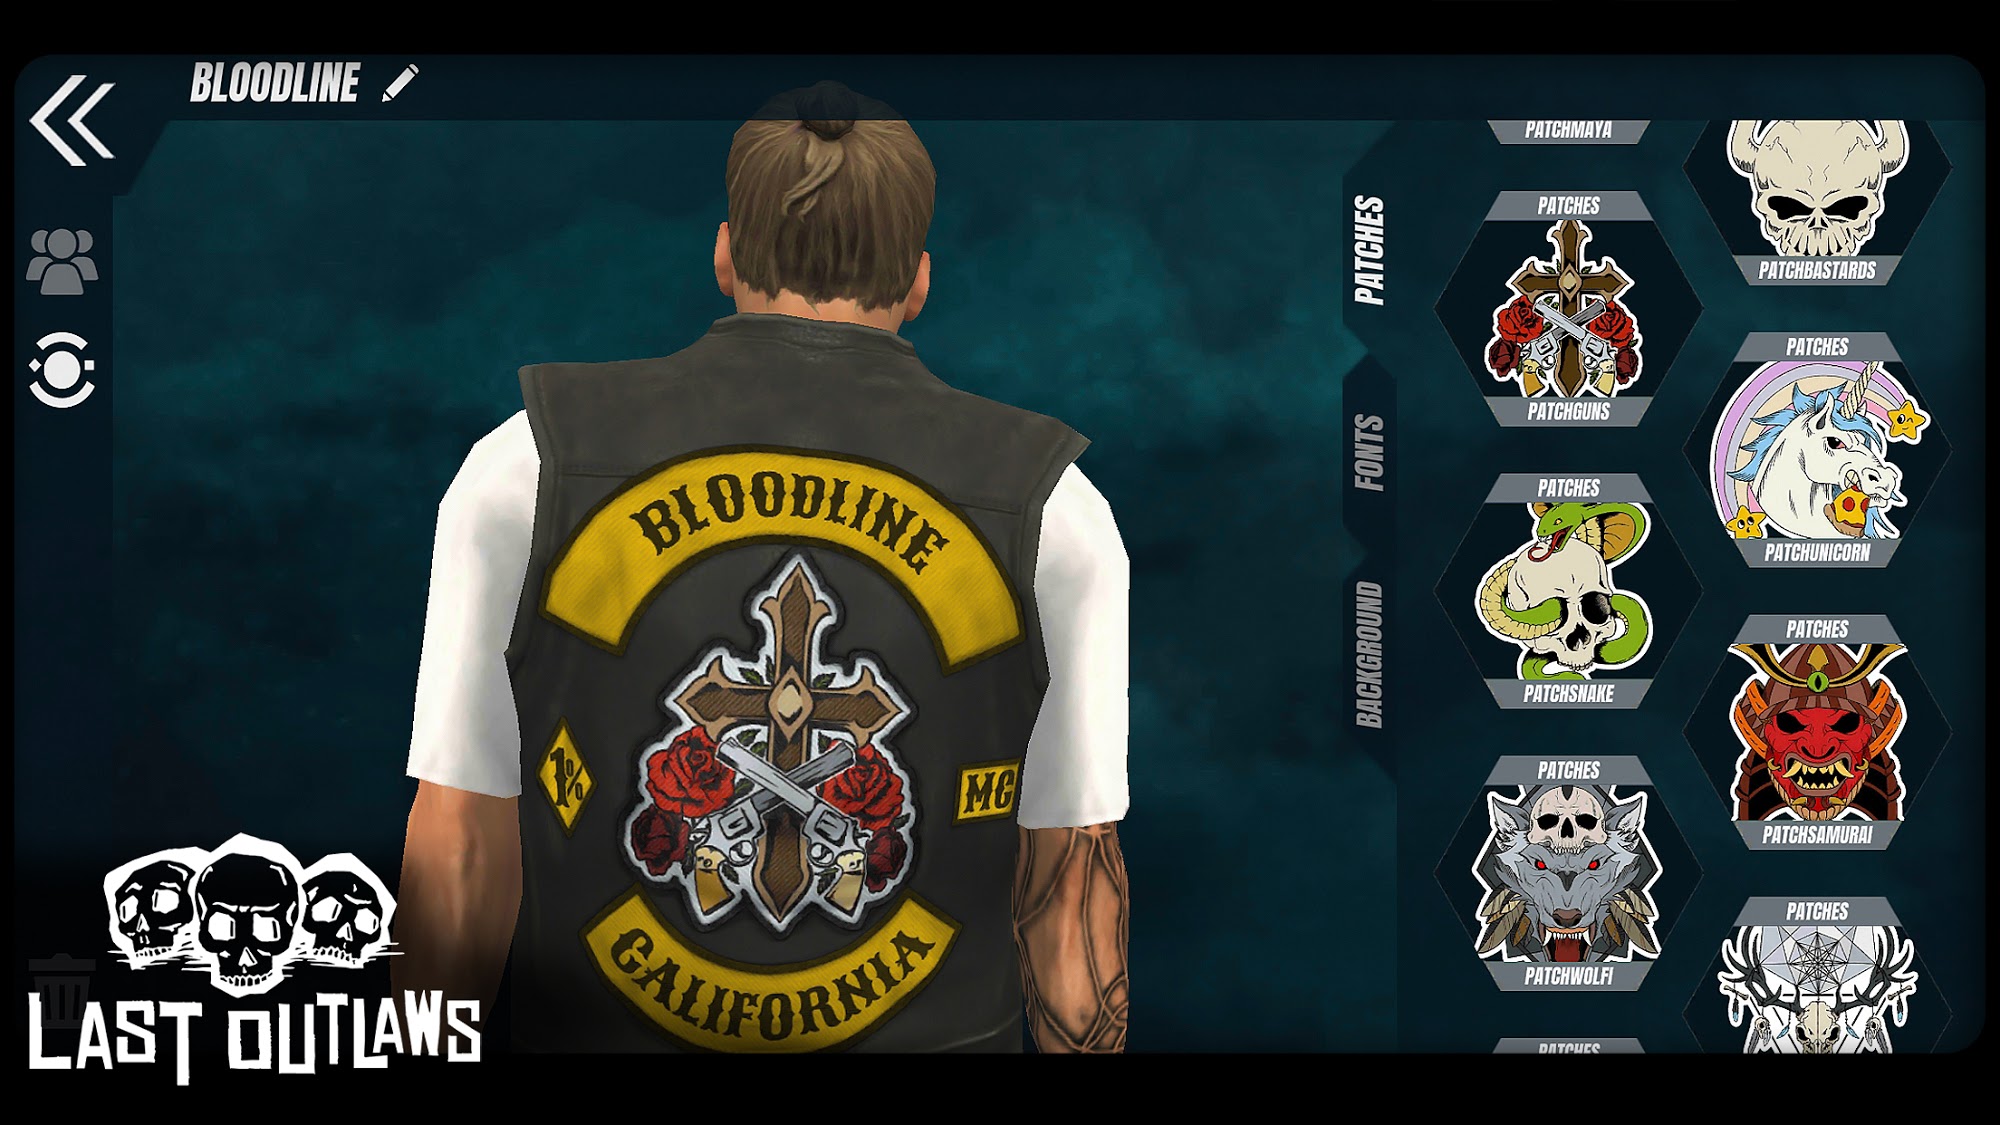 Last Outlaws: The Outlaw Biker Strategy Game screenshot 1